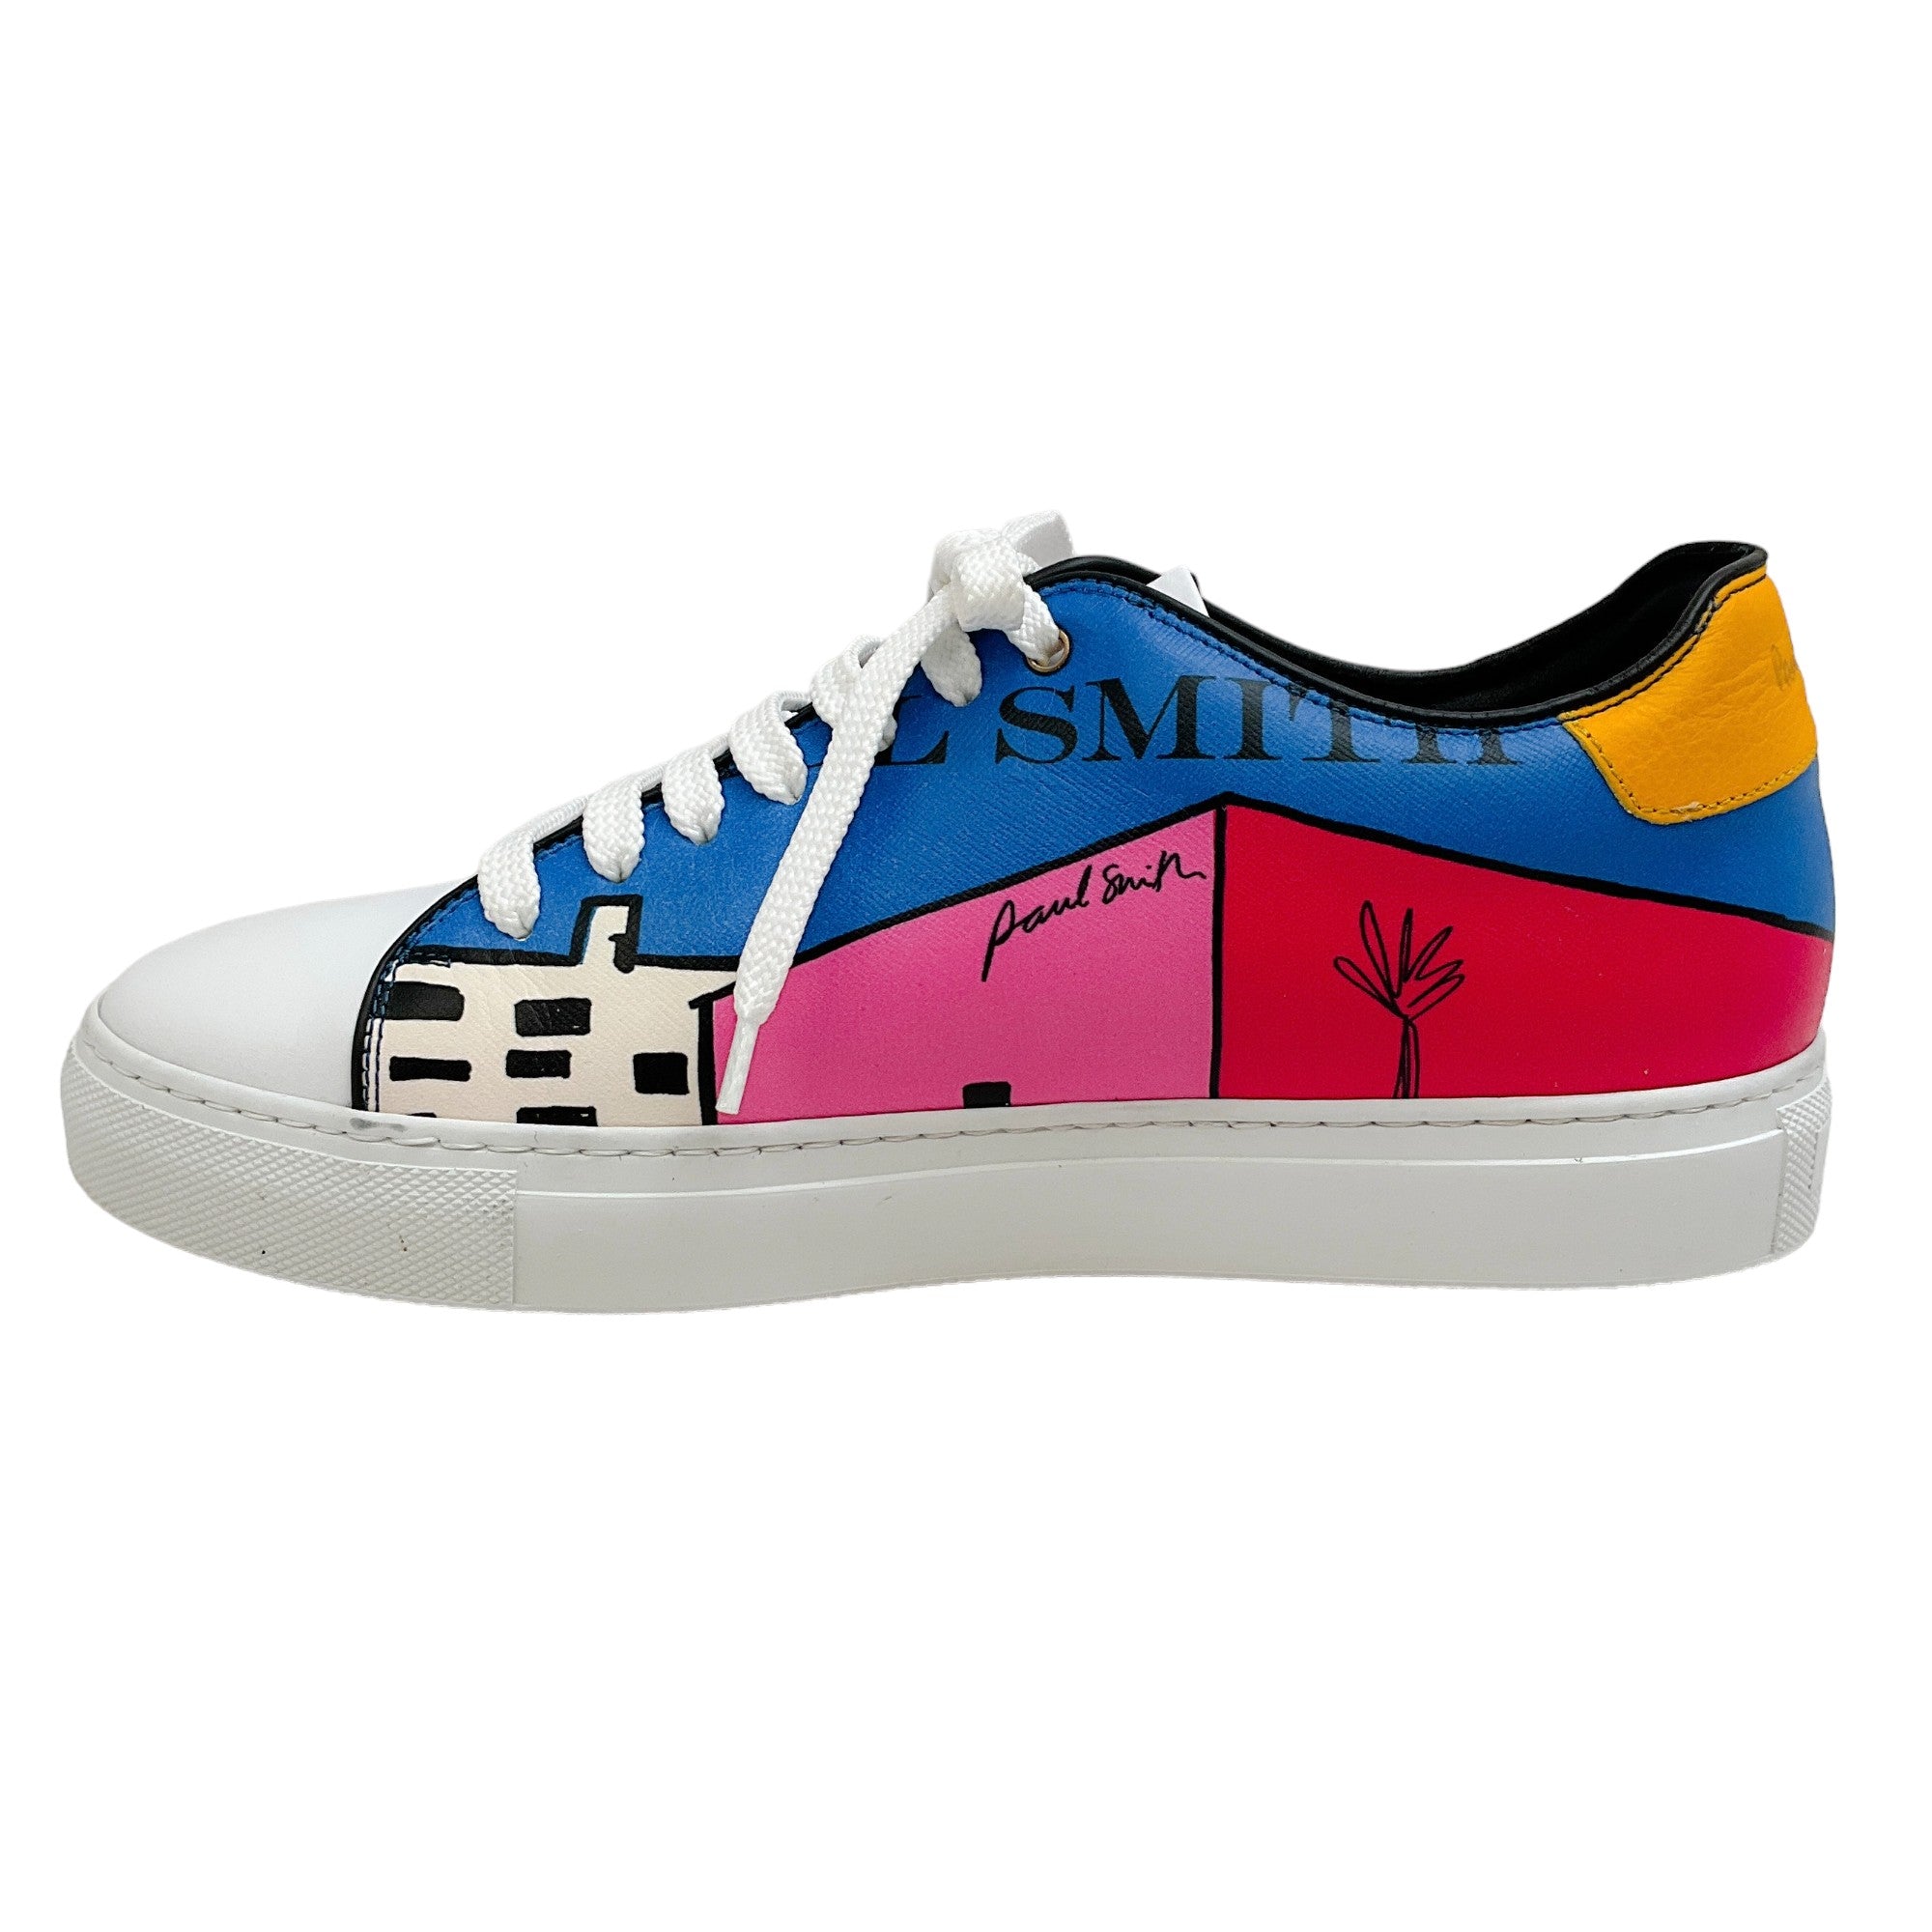 Paul Smith Multi Leather Basso Sneakers